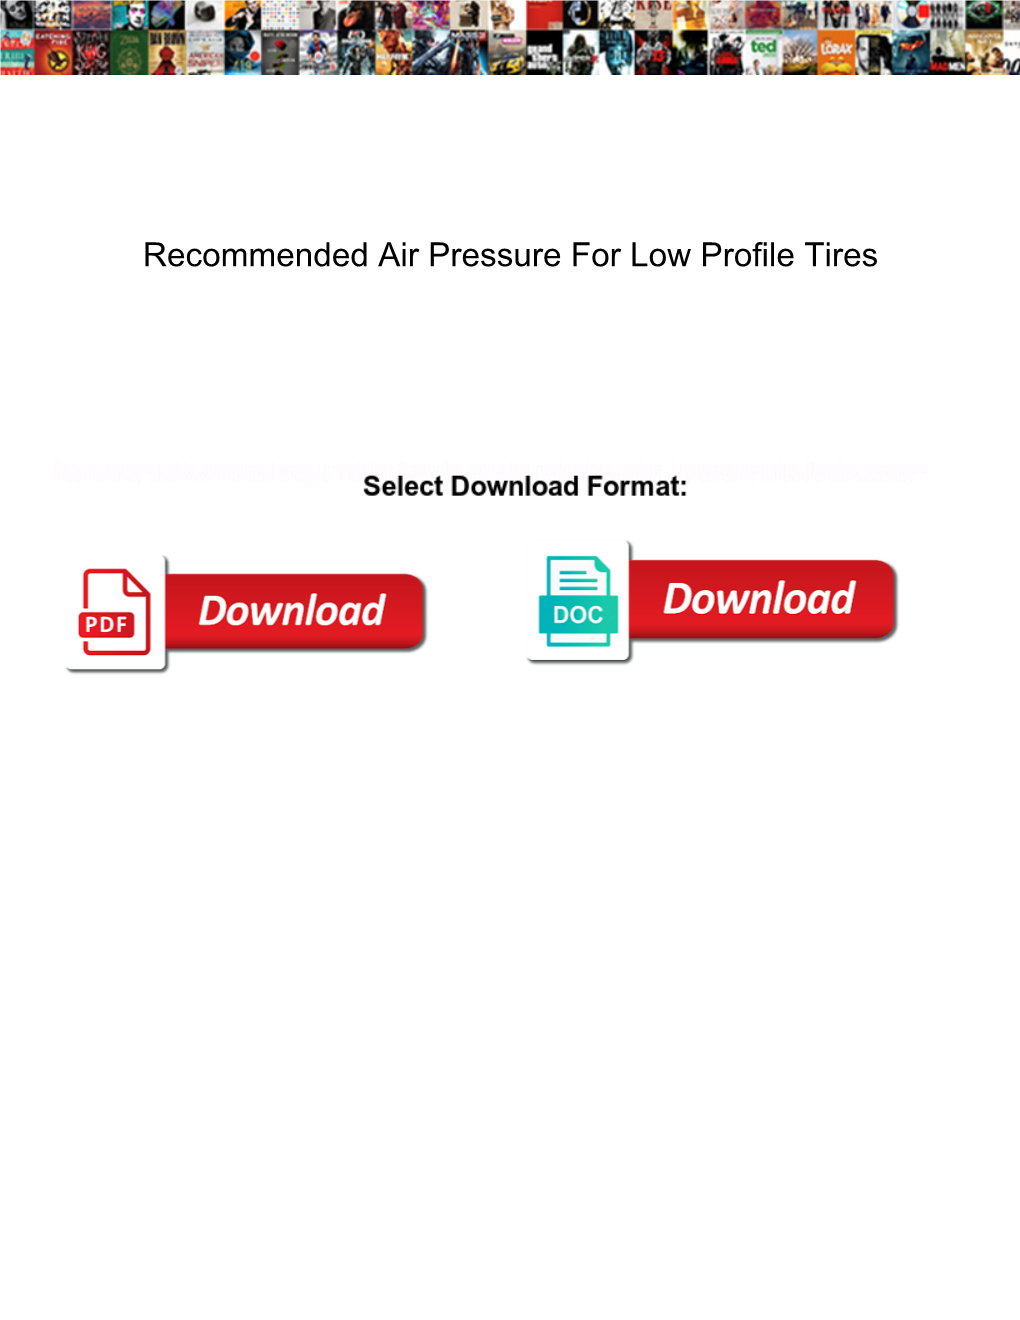 Recommended Air Pressure for Low Profile Tires